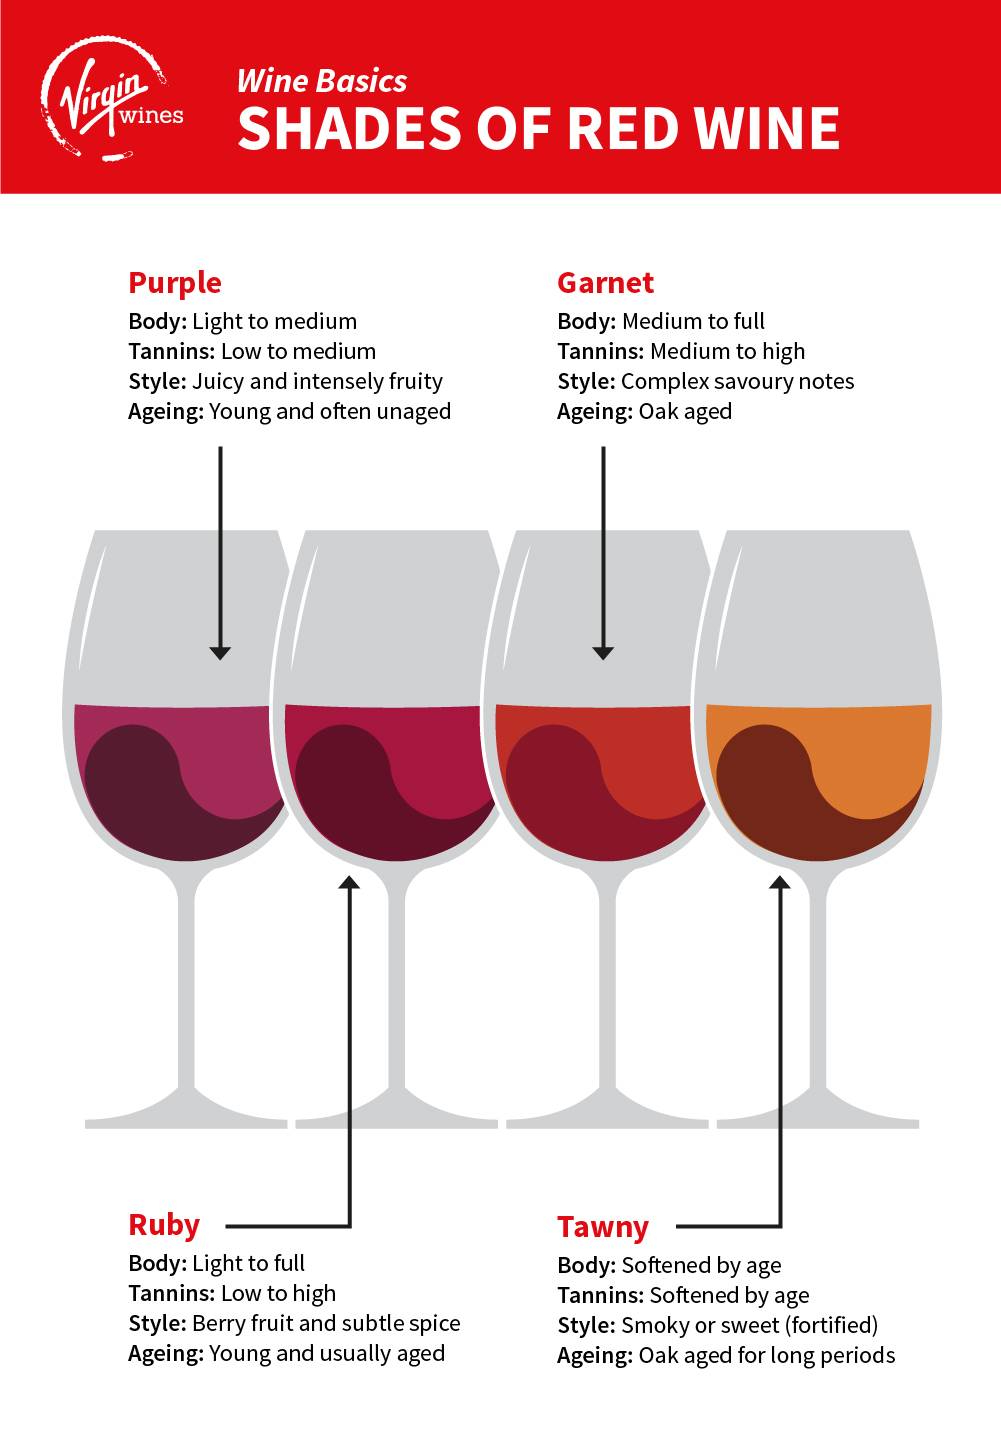 https://www.virginwines.co.uk/hub/wp-content/uploads/2020/02/Infographic-by-Virgin-Wines-showing-different-shades-of-red-wine-and-what-each-colour-can-signify-about-the-style-of-wine-1.jpg